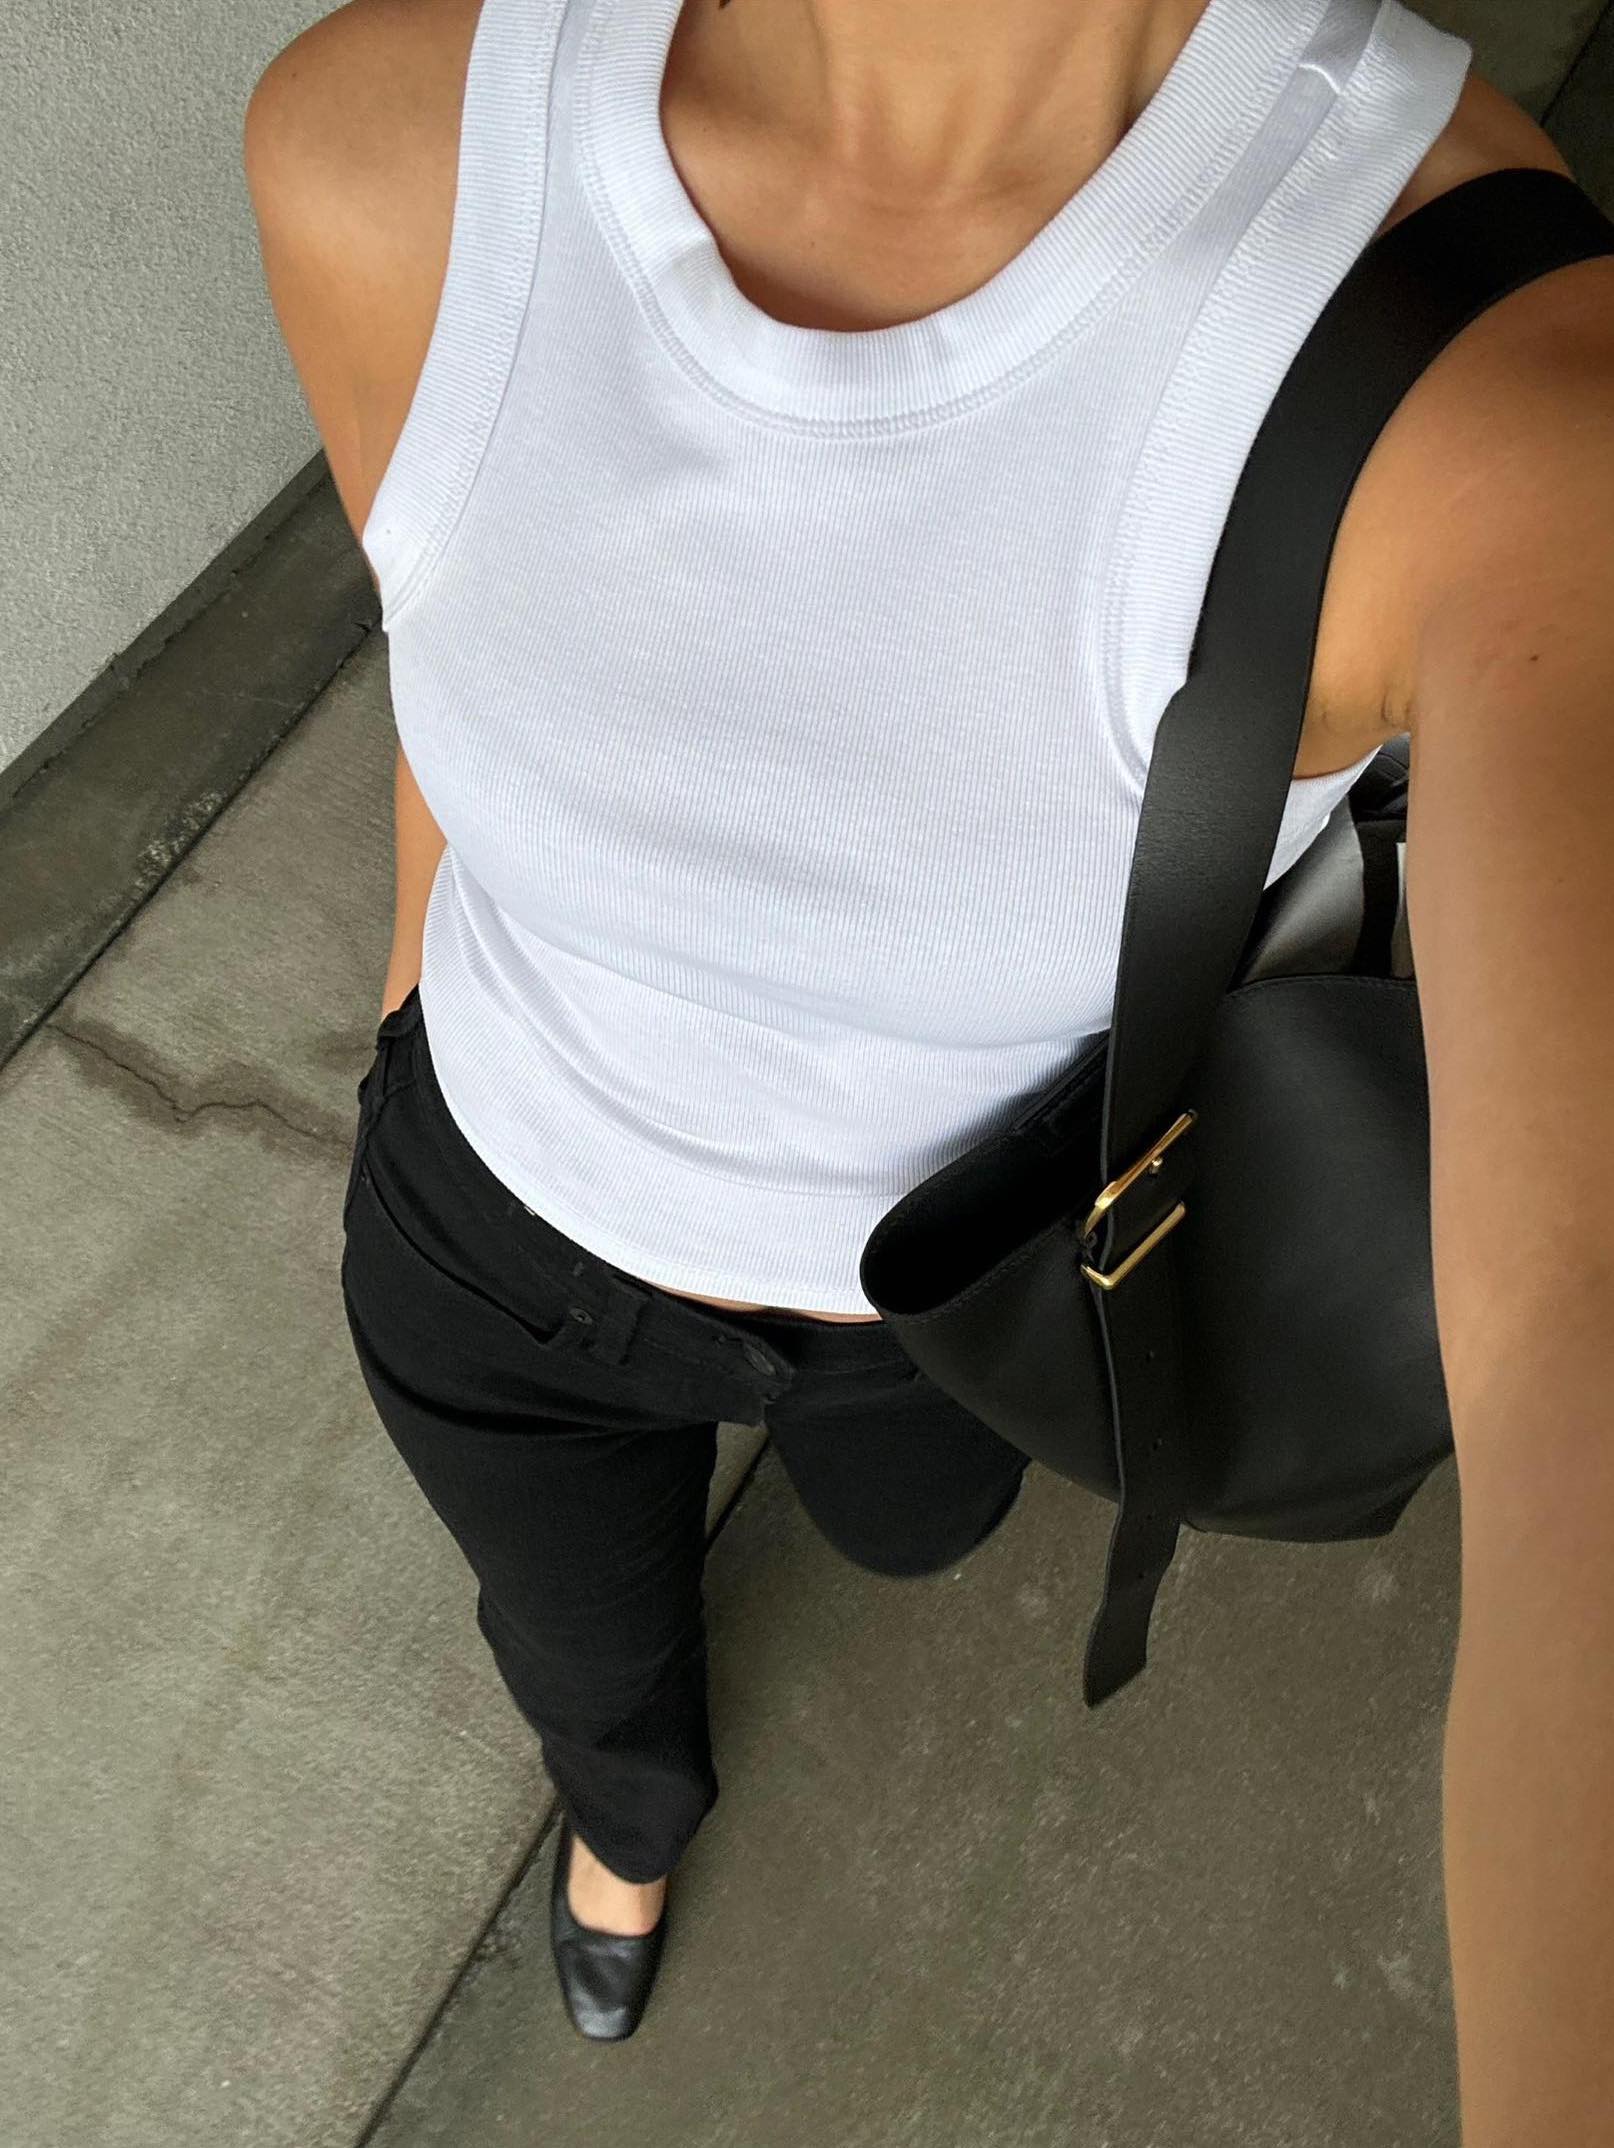 influencer Jordan Santos takes a selfie of her outfit from above wearing a white ribbed tank top, black leather tote bag, black pants, and black ballet flats